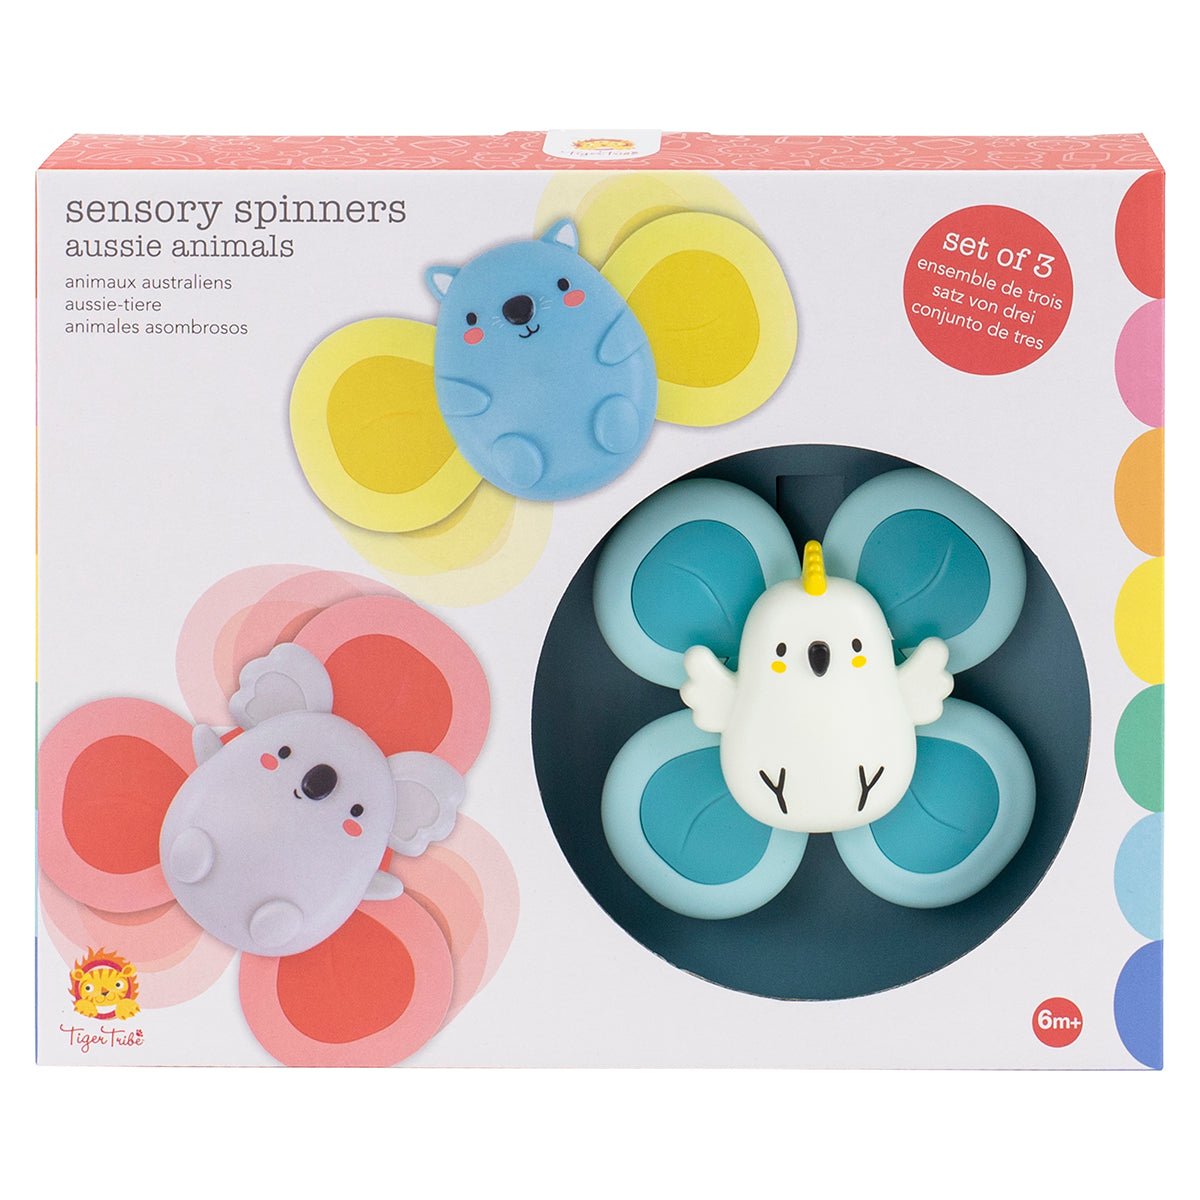 Aussie Animal Sensory Spinners | Tiger Tribe